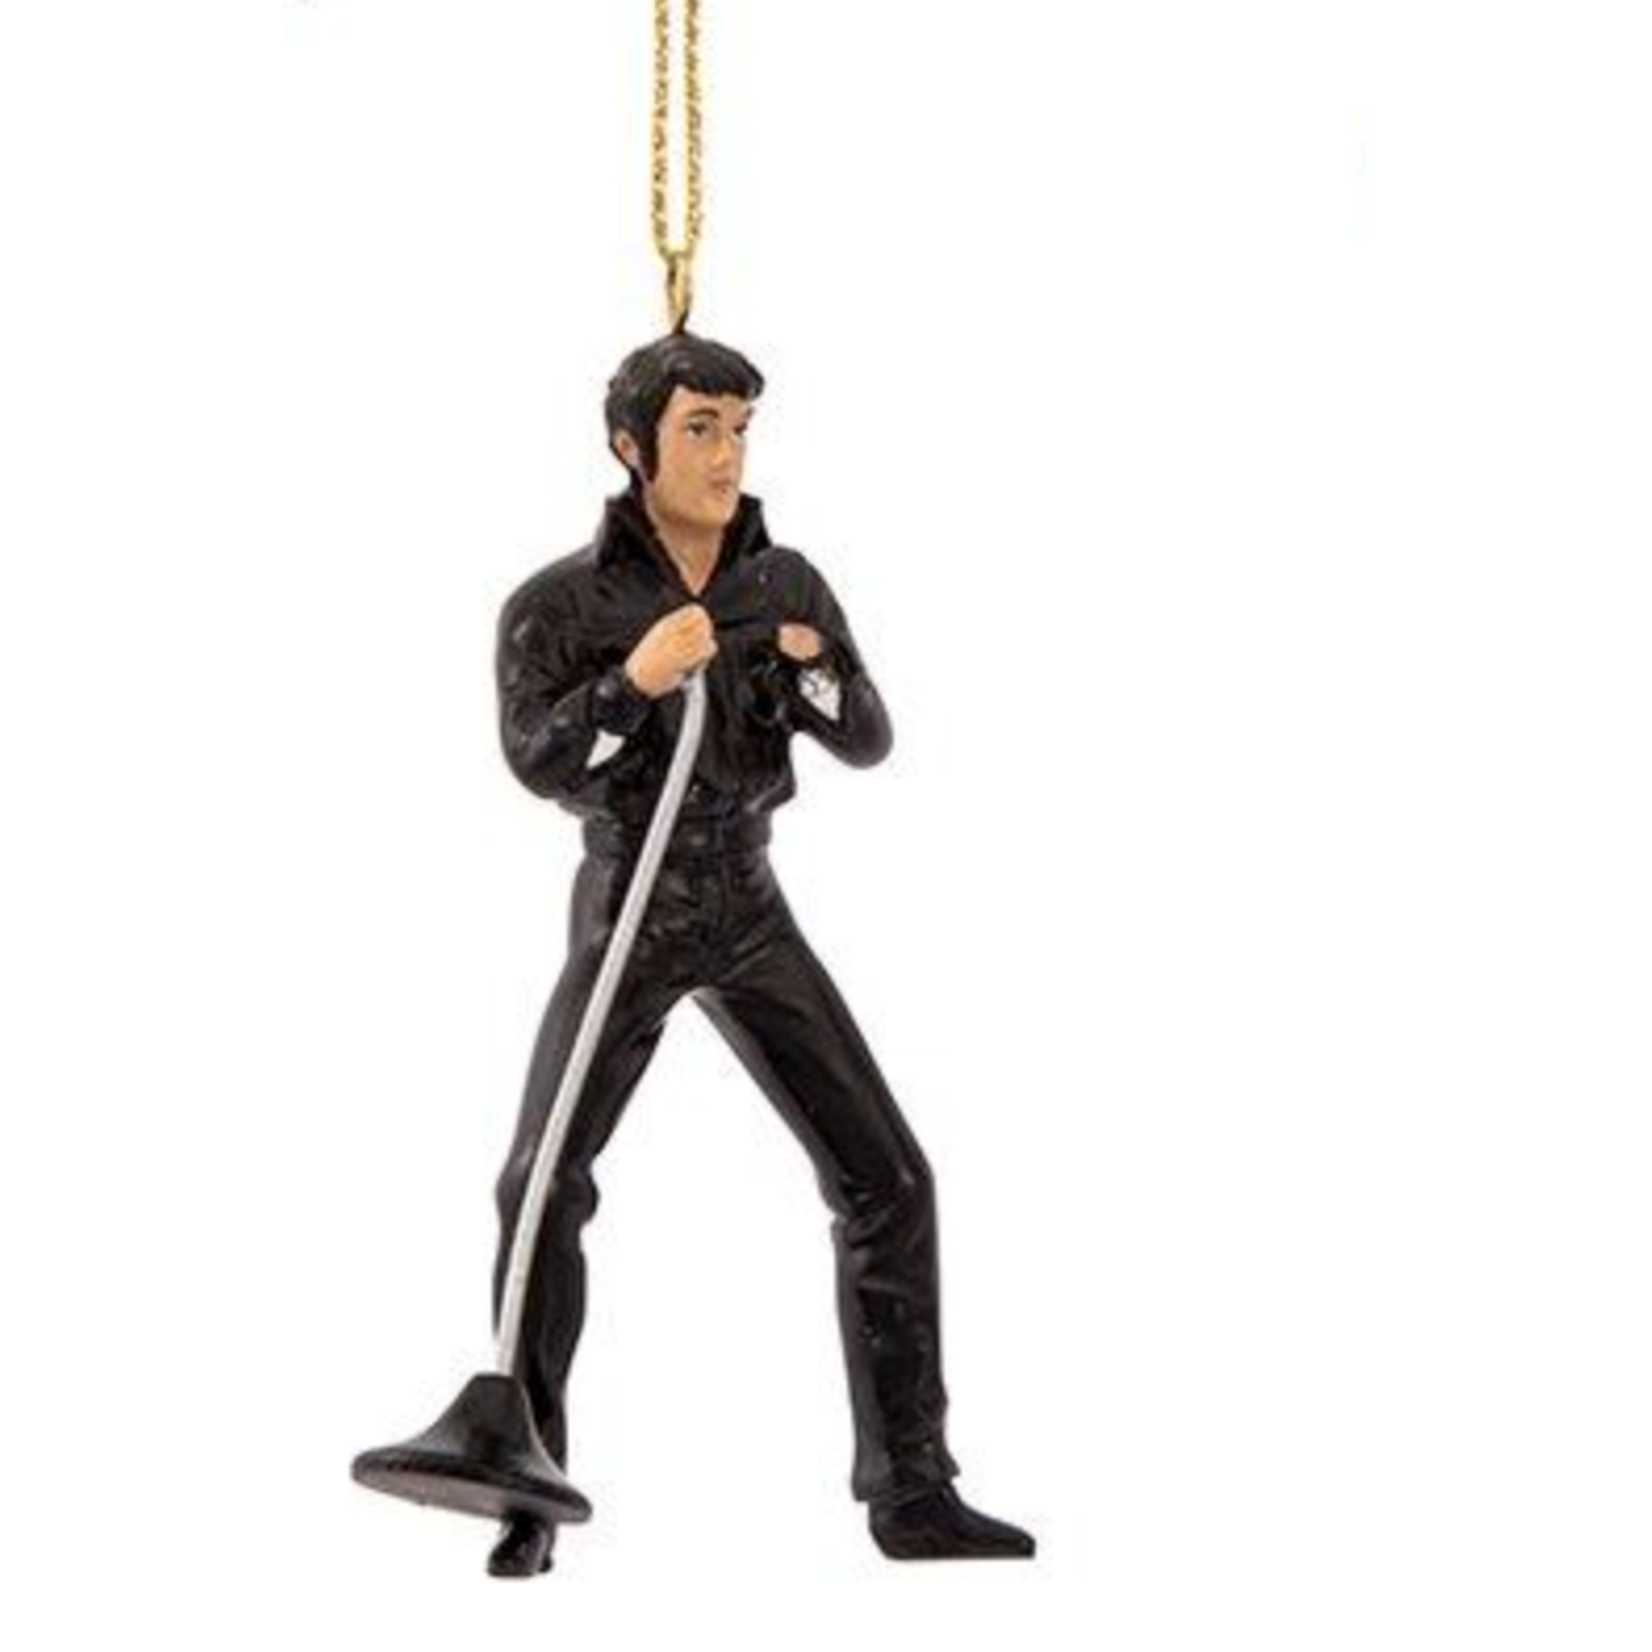 Ornament - Elvis - 2.5 inch Black Outfit